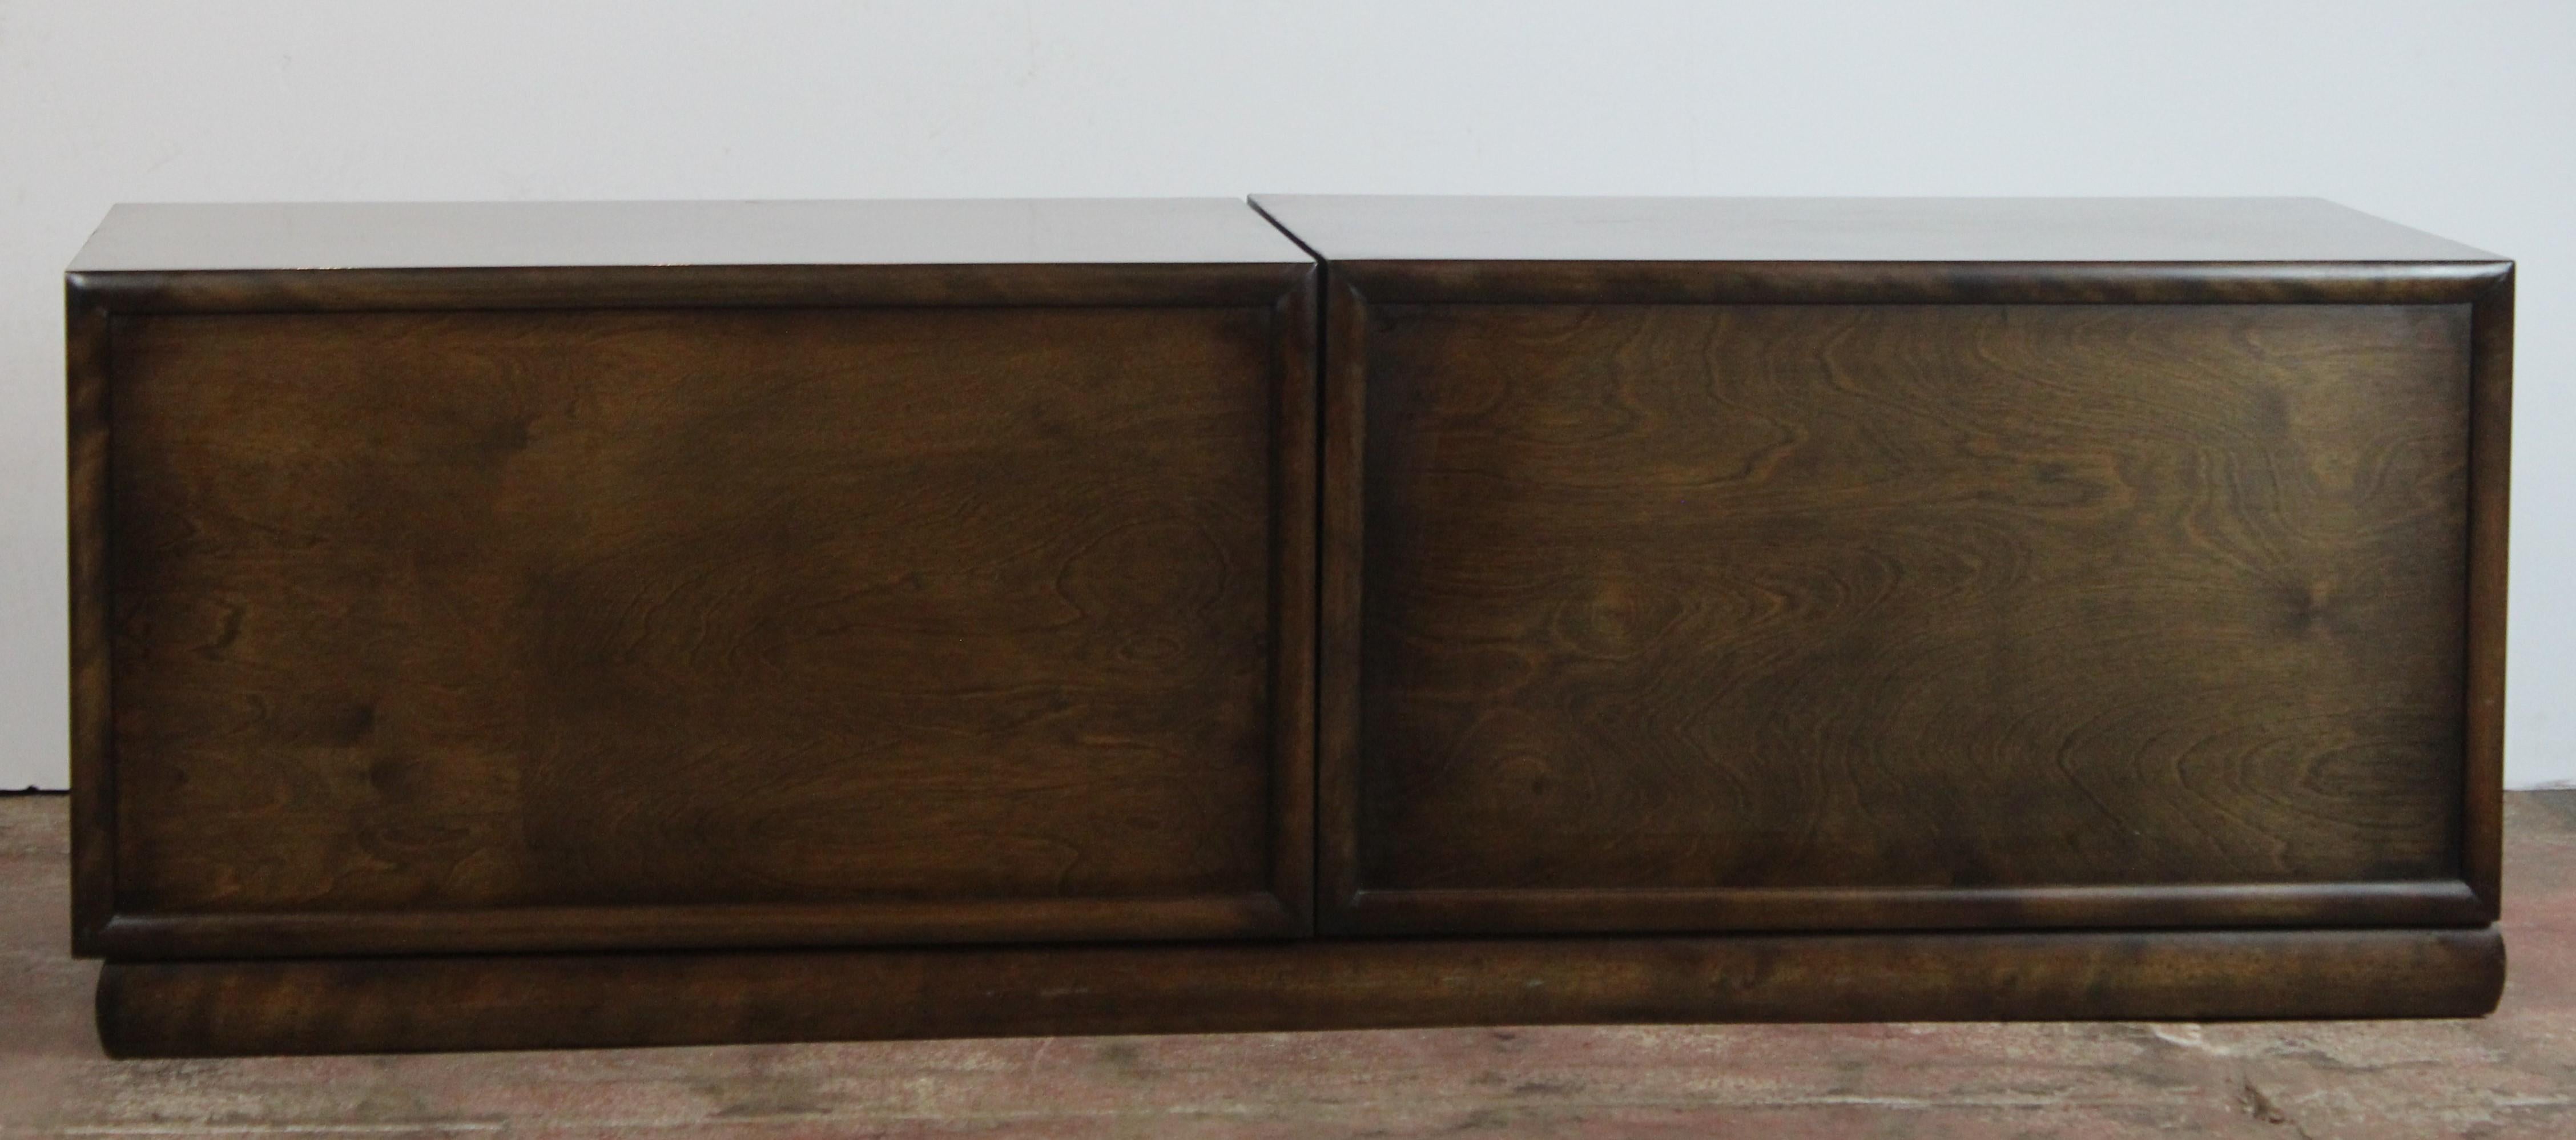 Mid-20th Century Credenza by Albright & Zimmerman